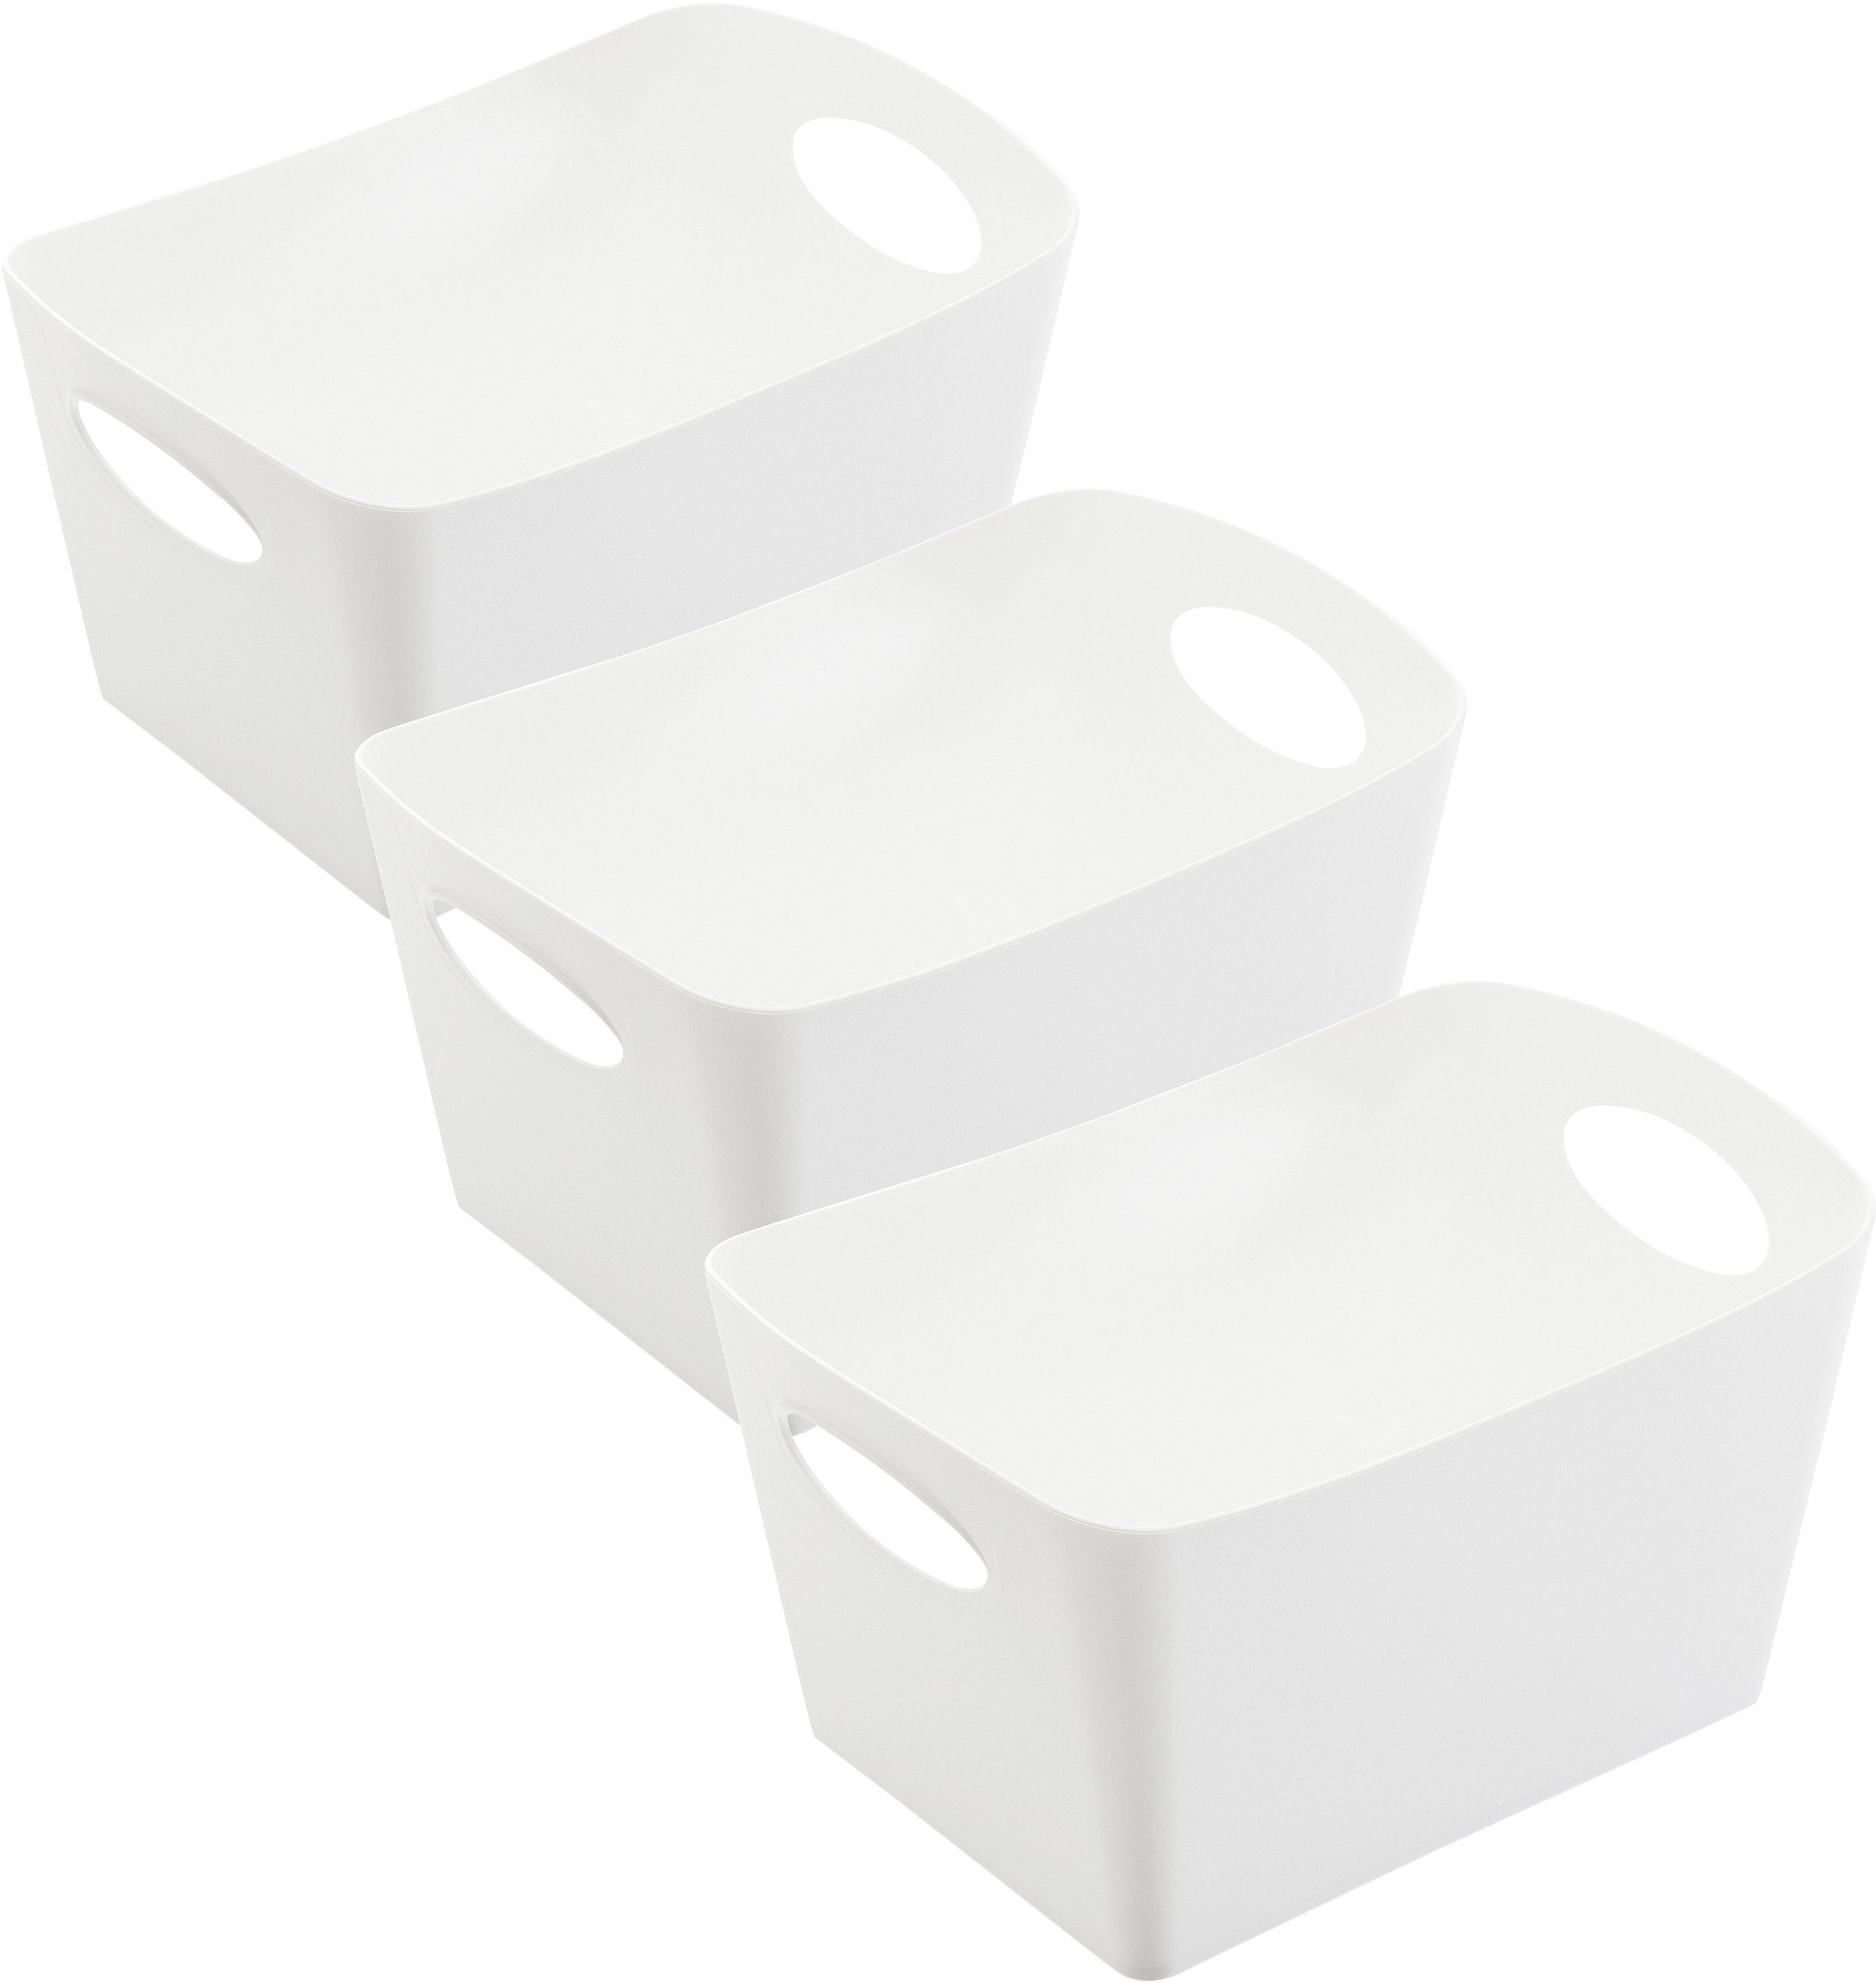 KOZIOL Organizer BOXXX S (Set, 3 St), Aufbewahrungsbox, Made in Germany, 100% recyceltes Material, 1 Liter recycled white